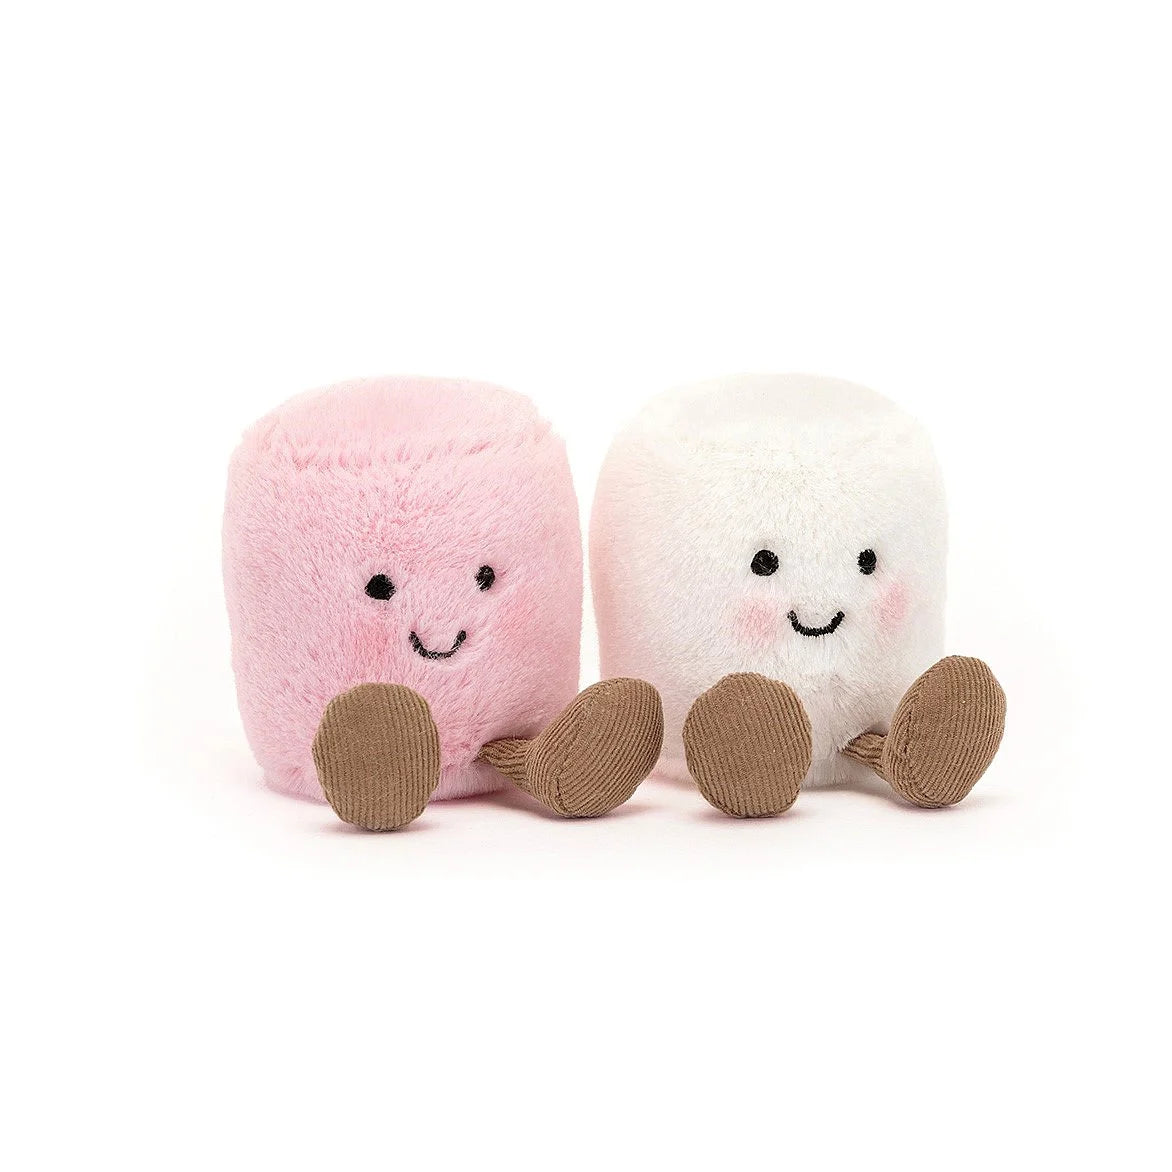 jellycat_marsh_mallows_with_a _cute_little_face